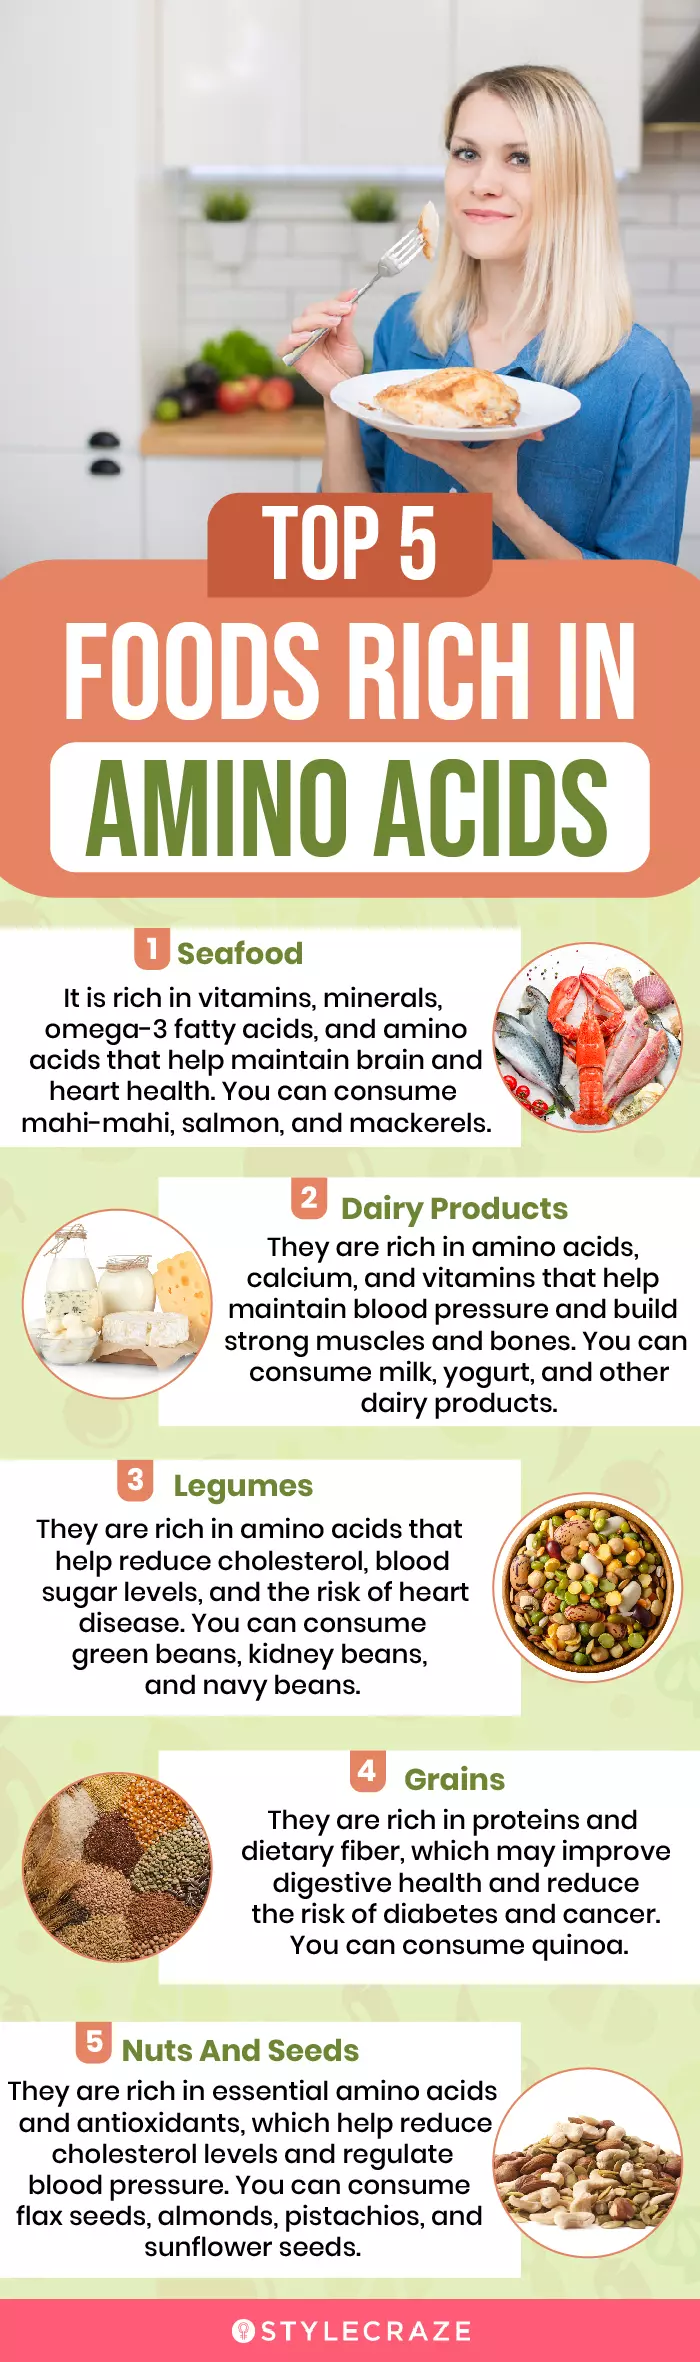 top 5 foods rich in amino acids (infographic)